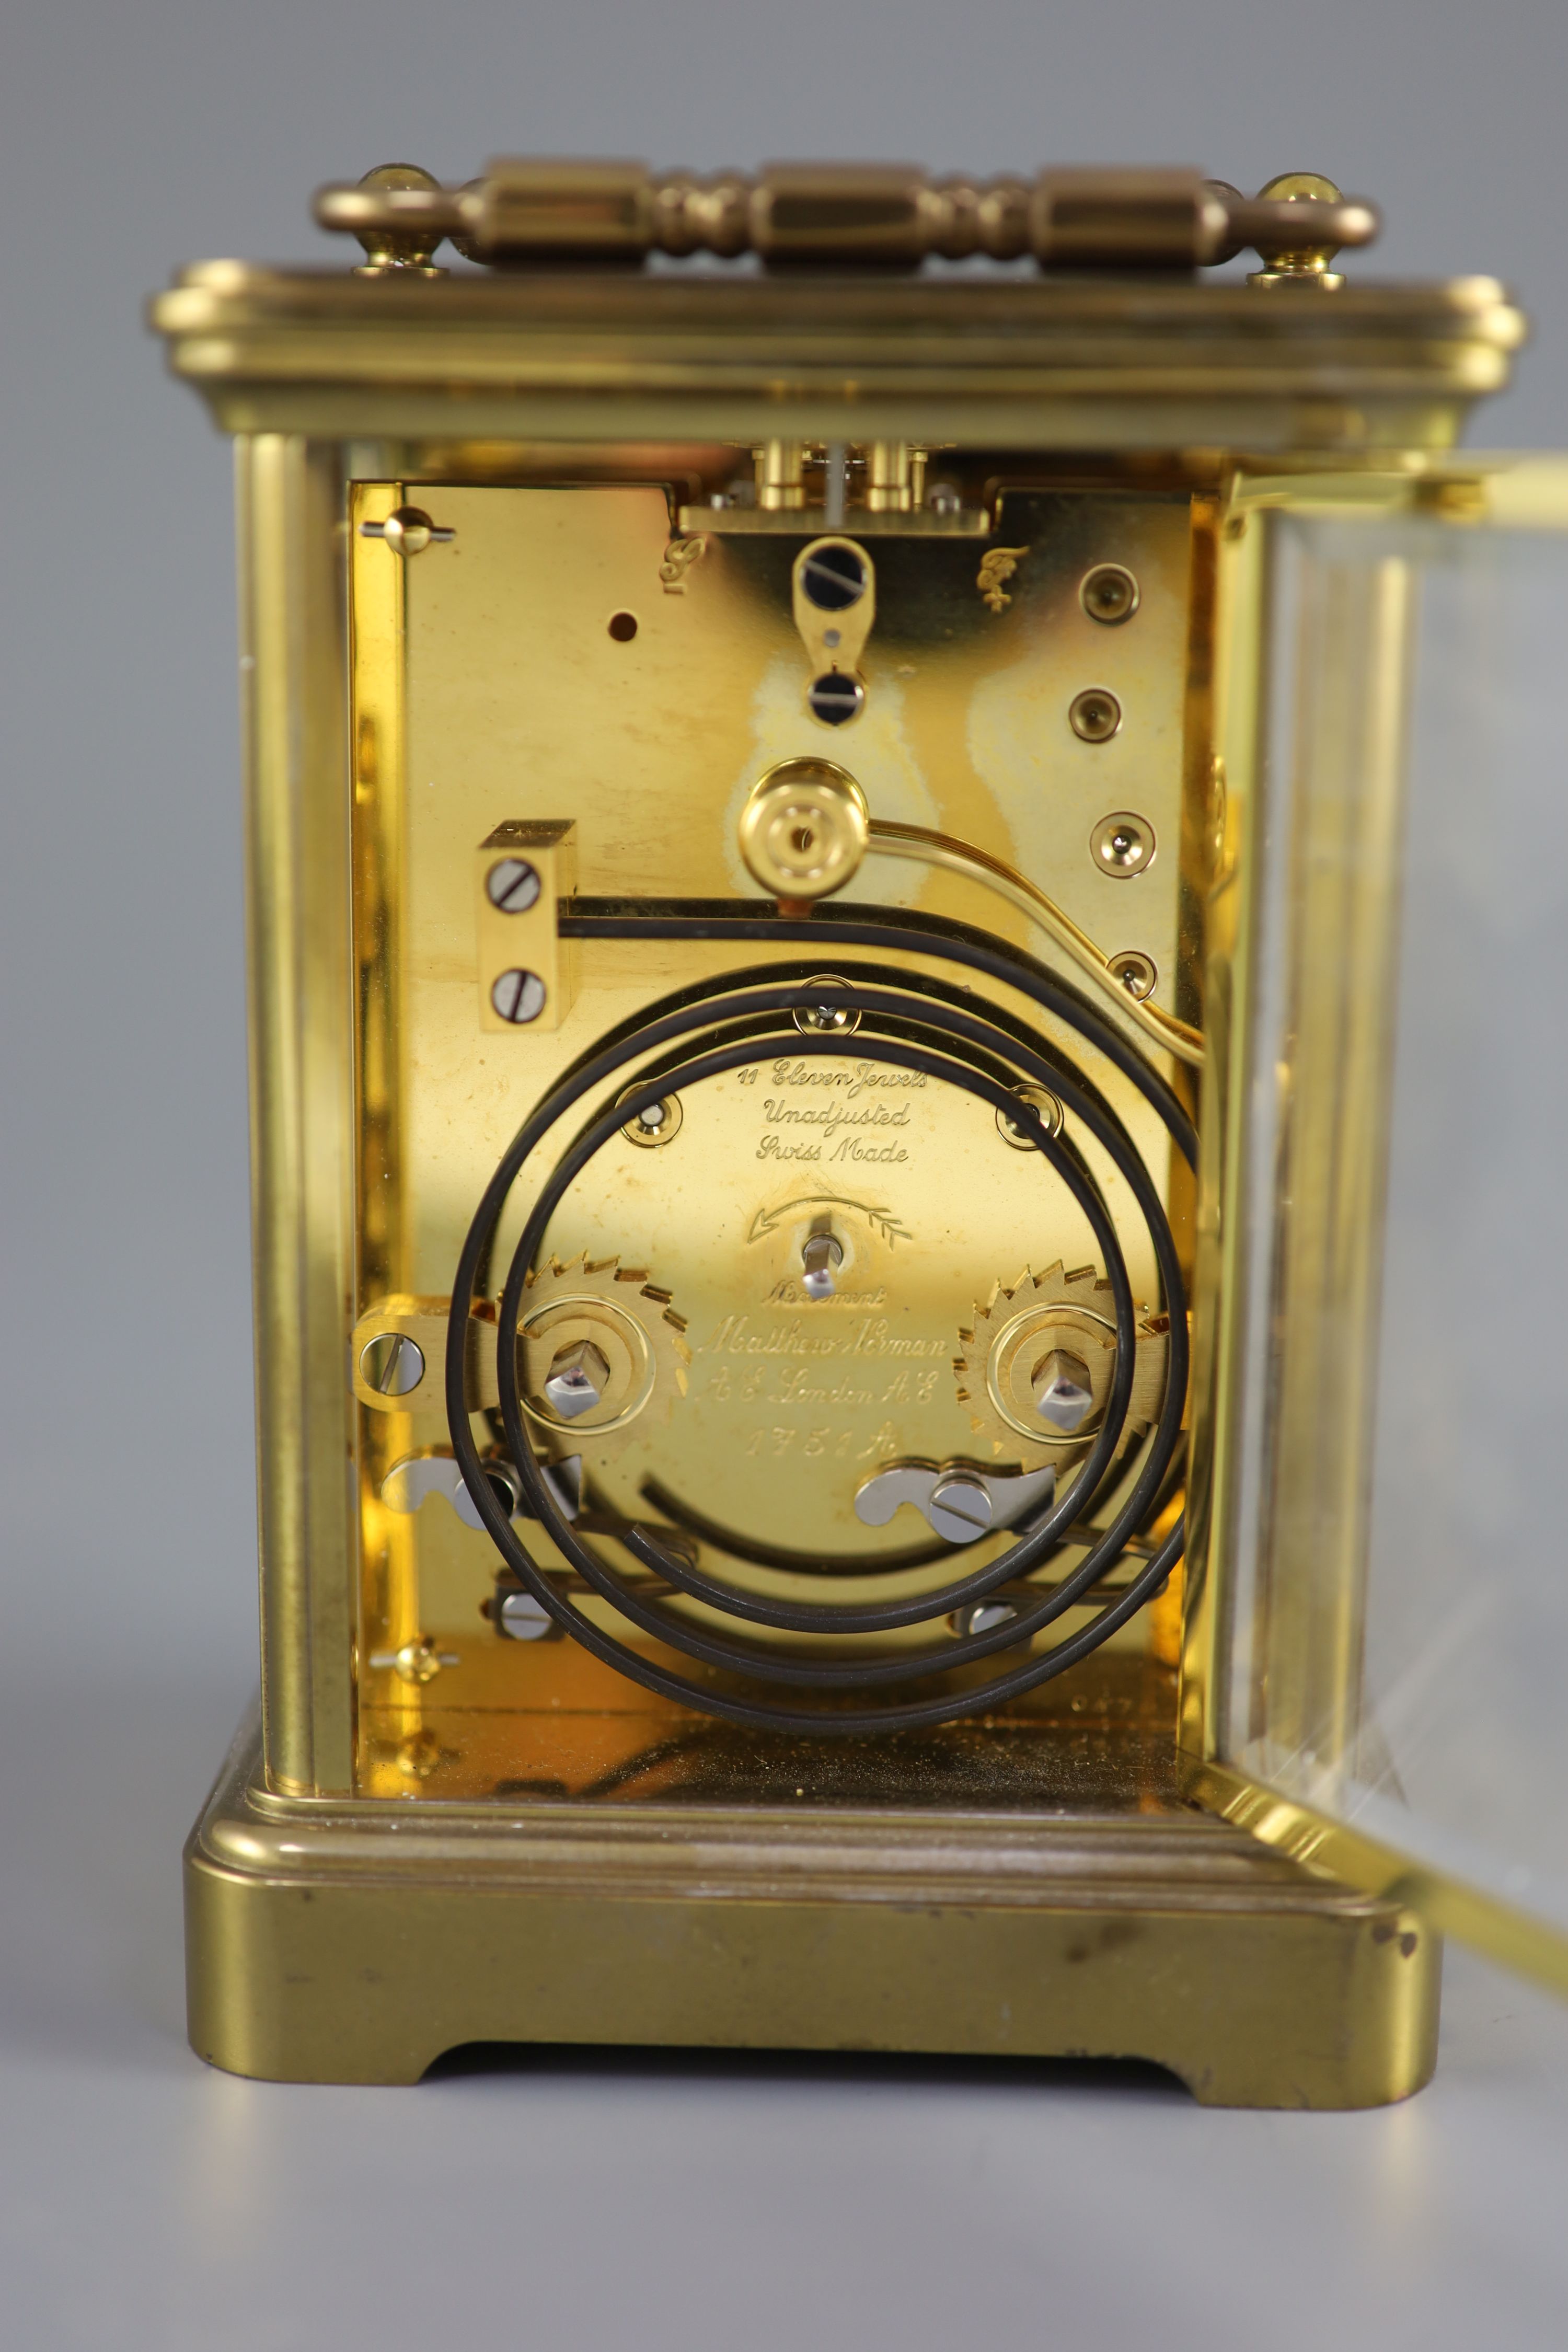 A large Swiss-made brass carriage clock, Matthew Norman, London, 20th centuryNo 1751A, white dial - Image 4 of 5